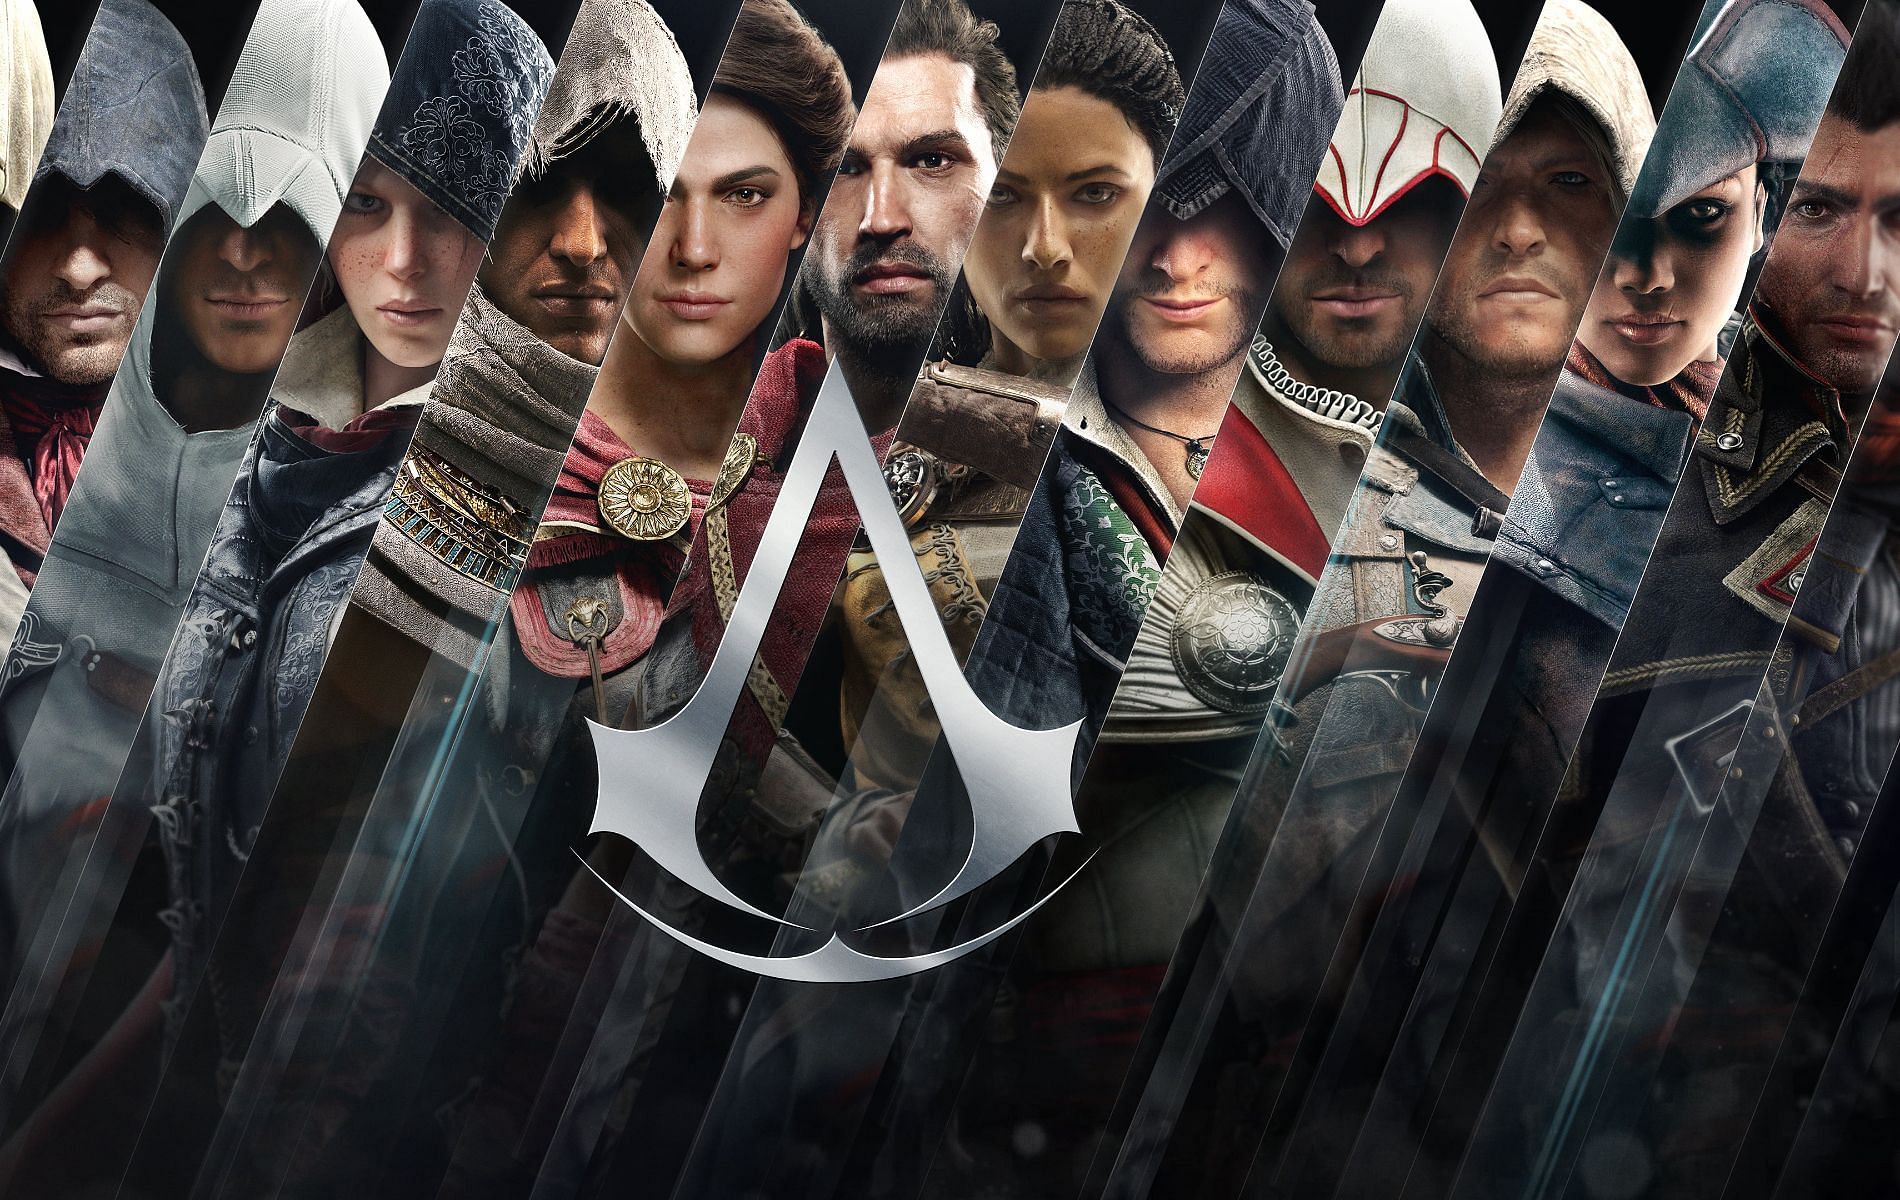 the image depicts all the protagonists of Assassin